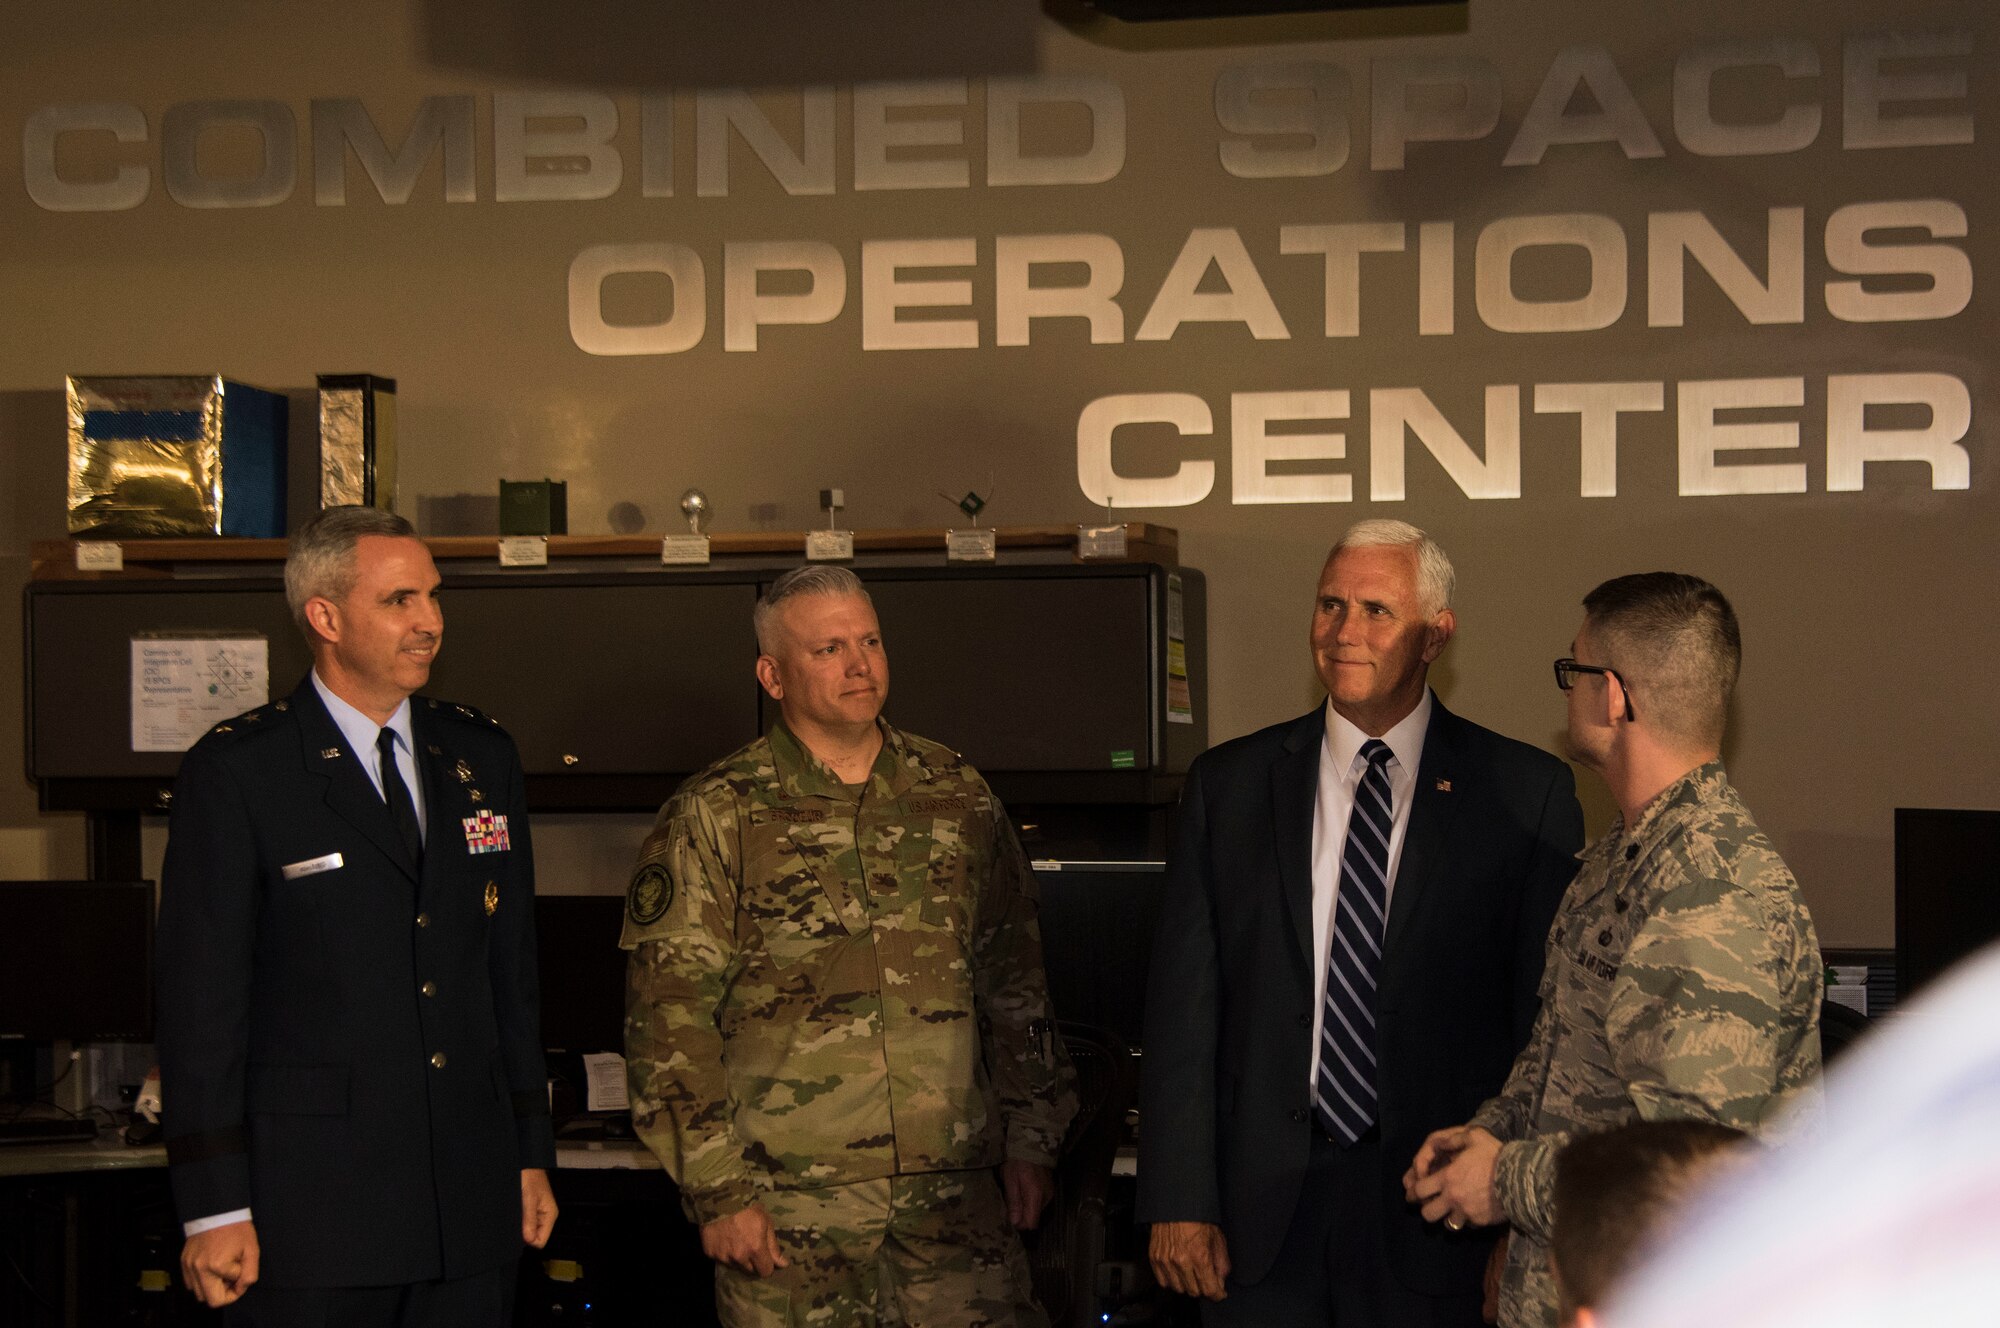 Vice President Mike Pence tours the Combined Space Operations Center July 10, 2019, at Vandenberg Air Force Base, Calif. While at the CSpOC, Pence met with base leadership and received briefings on the evolution of launch operations at the Western Range and CSpOC operations, which concluded with an all-call to the service men and women of Vandenberg AFB. (U.S. Air Force photo by Airman 1st Class Hanah Abercrombie)